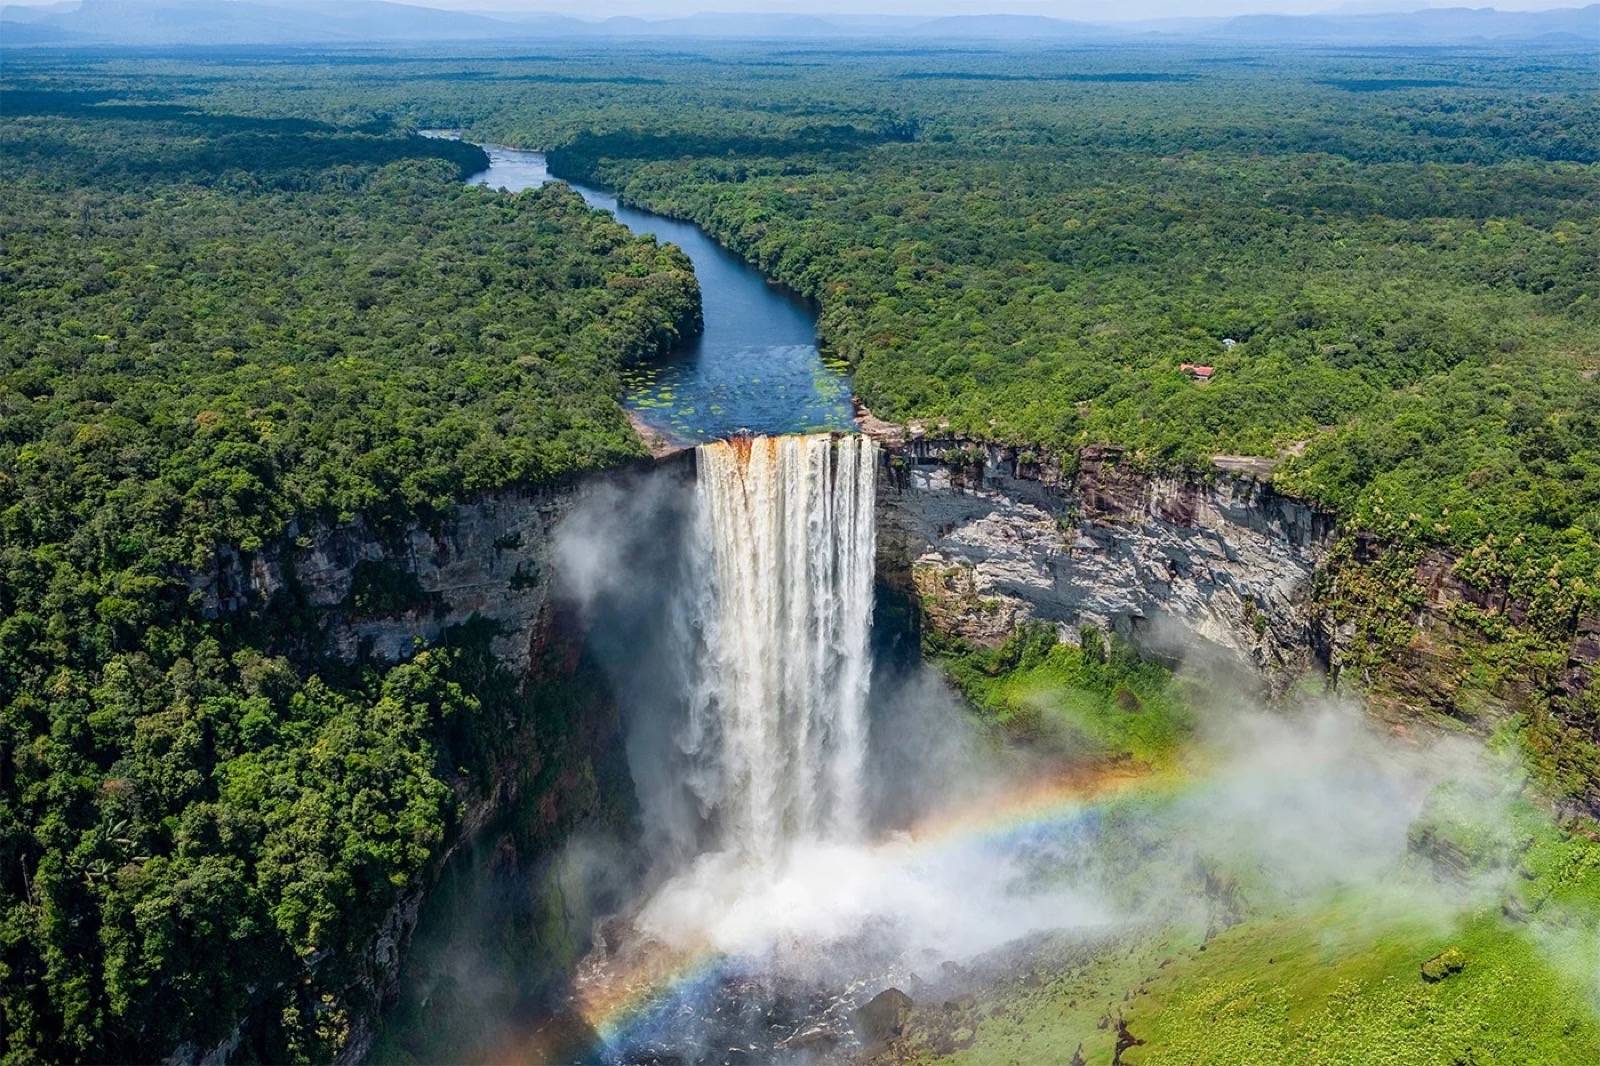 Are You a World Traveler? Test Your Knowledge by Matching These Majestic Natural Sites to Their Countries! Kaieteur Falls, Guyana